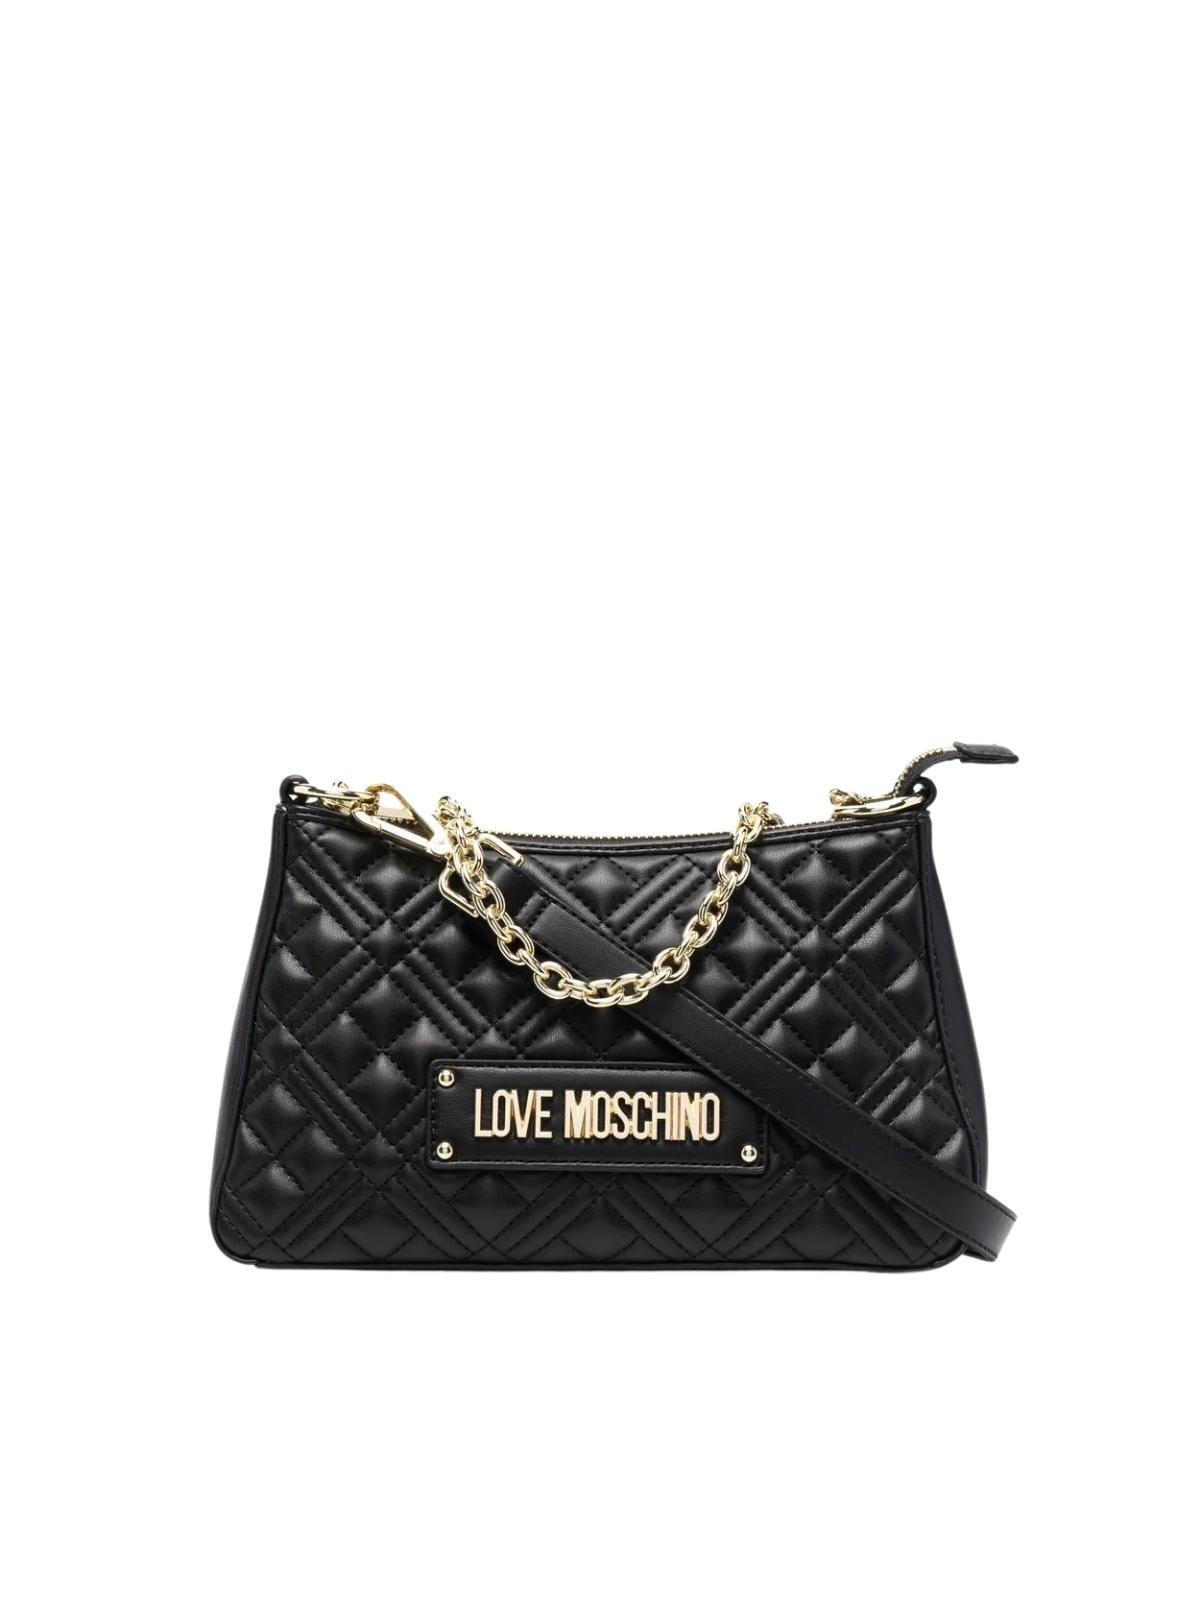 Love Moschino Quilted Pu Bag in black